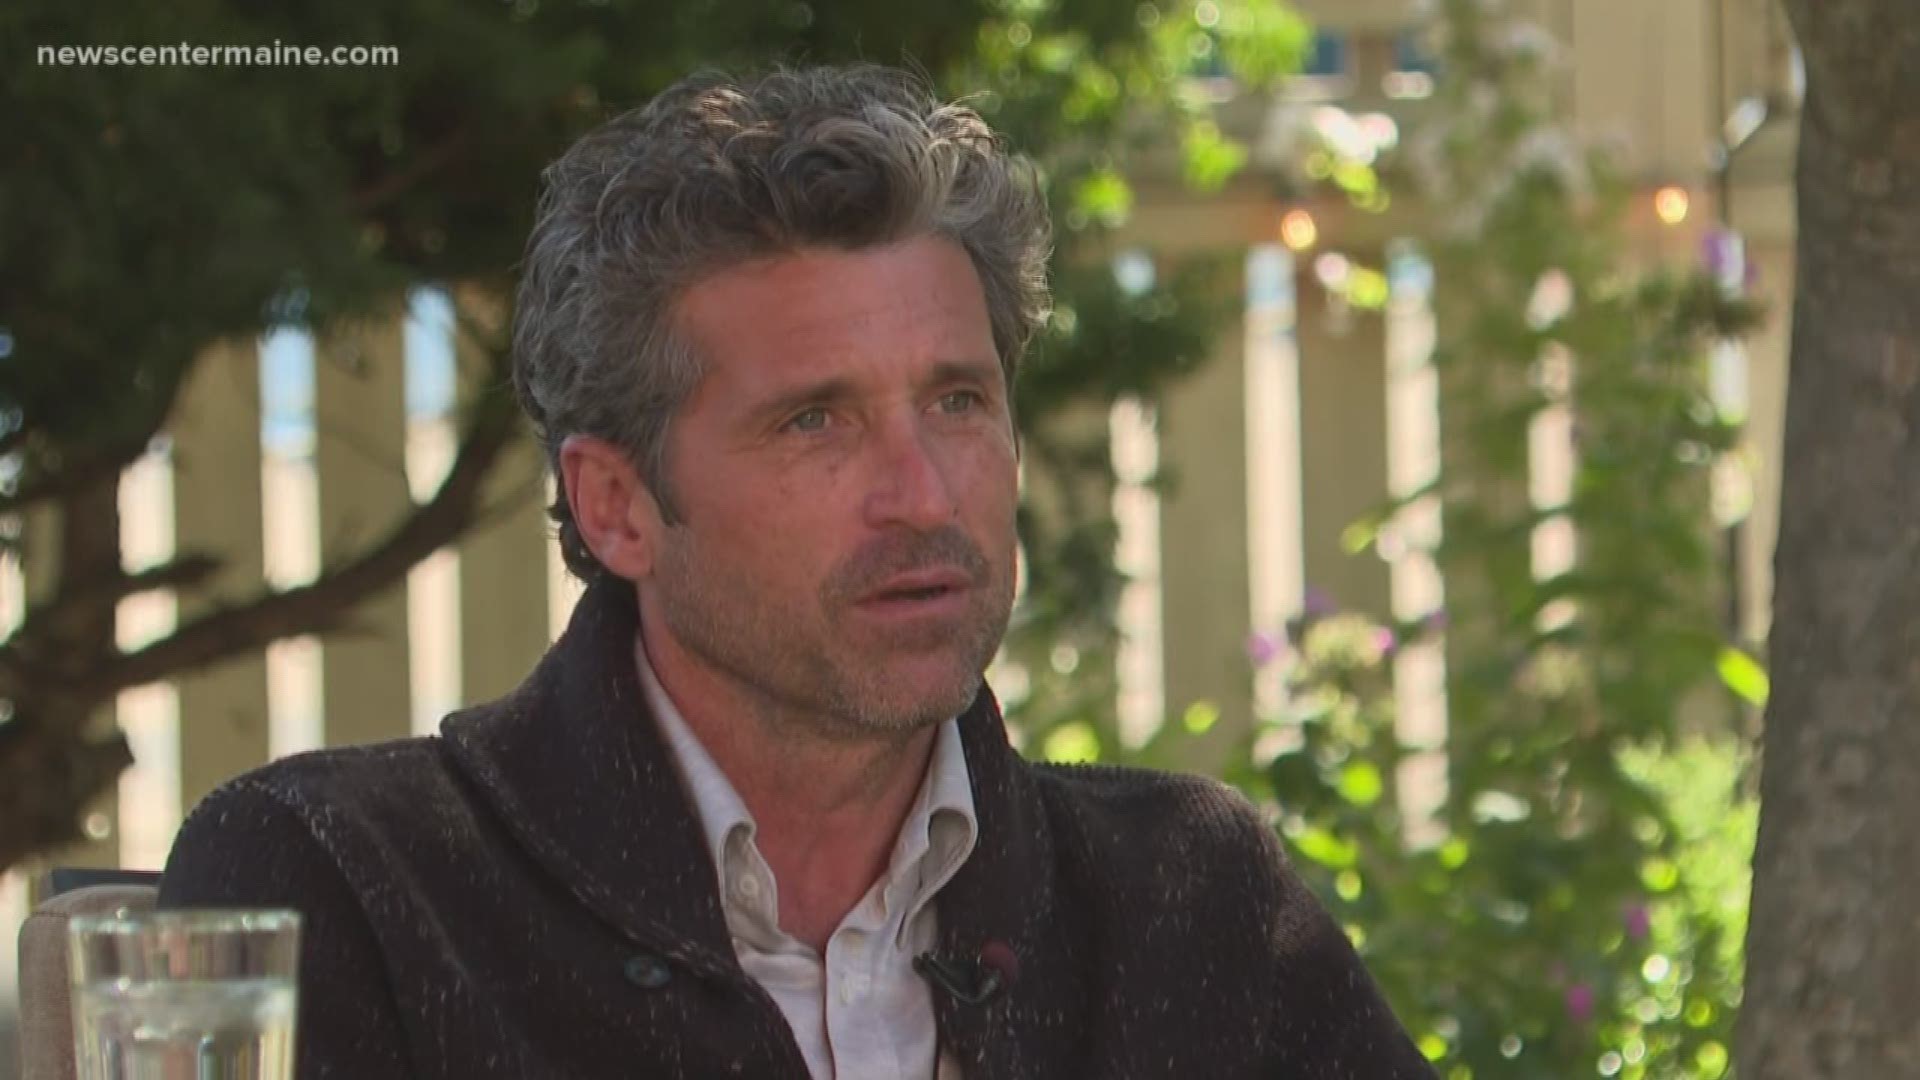 Patrick Dempsey talks about Maine and his passion for helping cancer patients